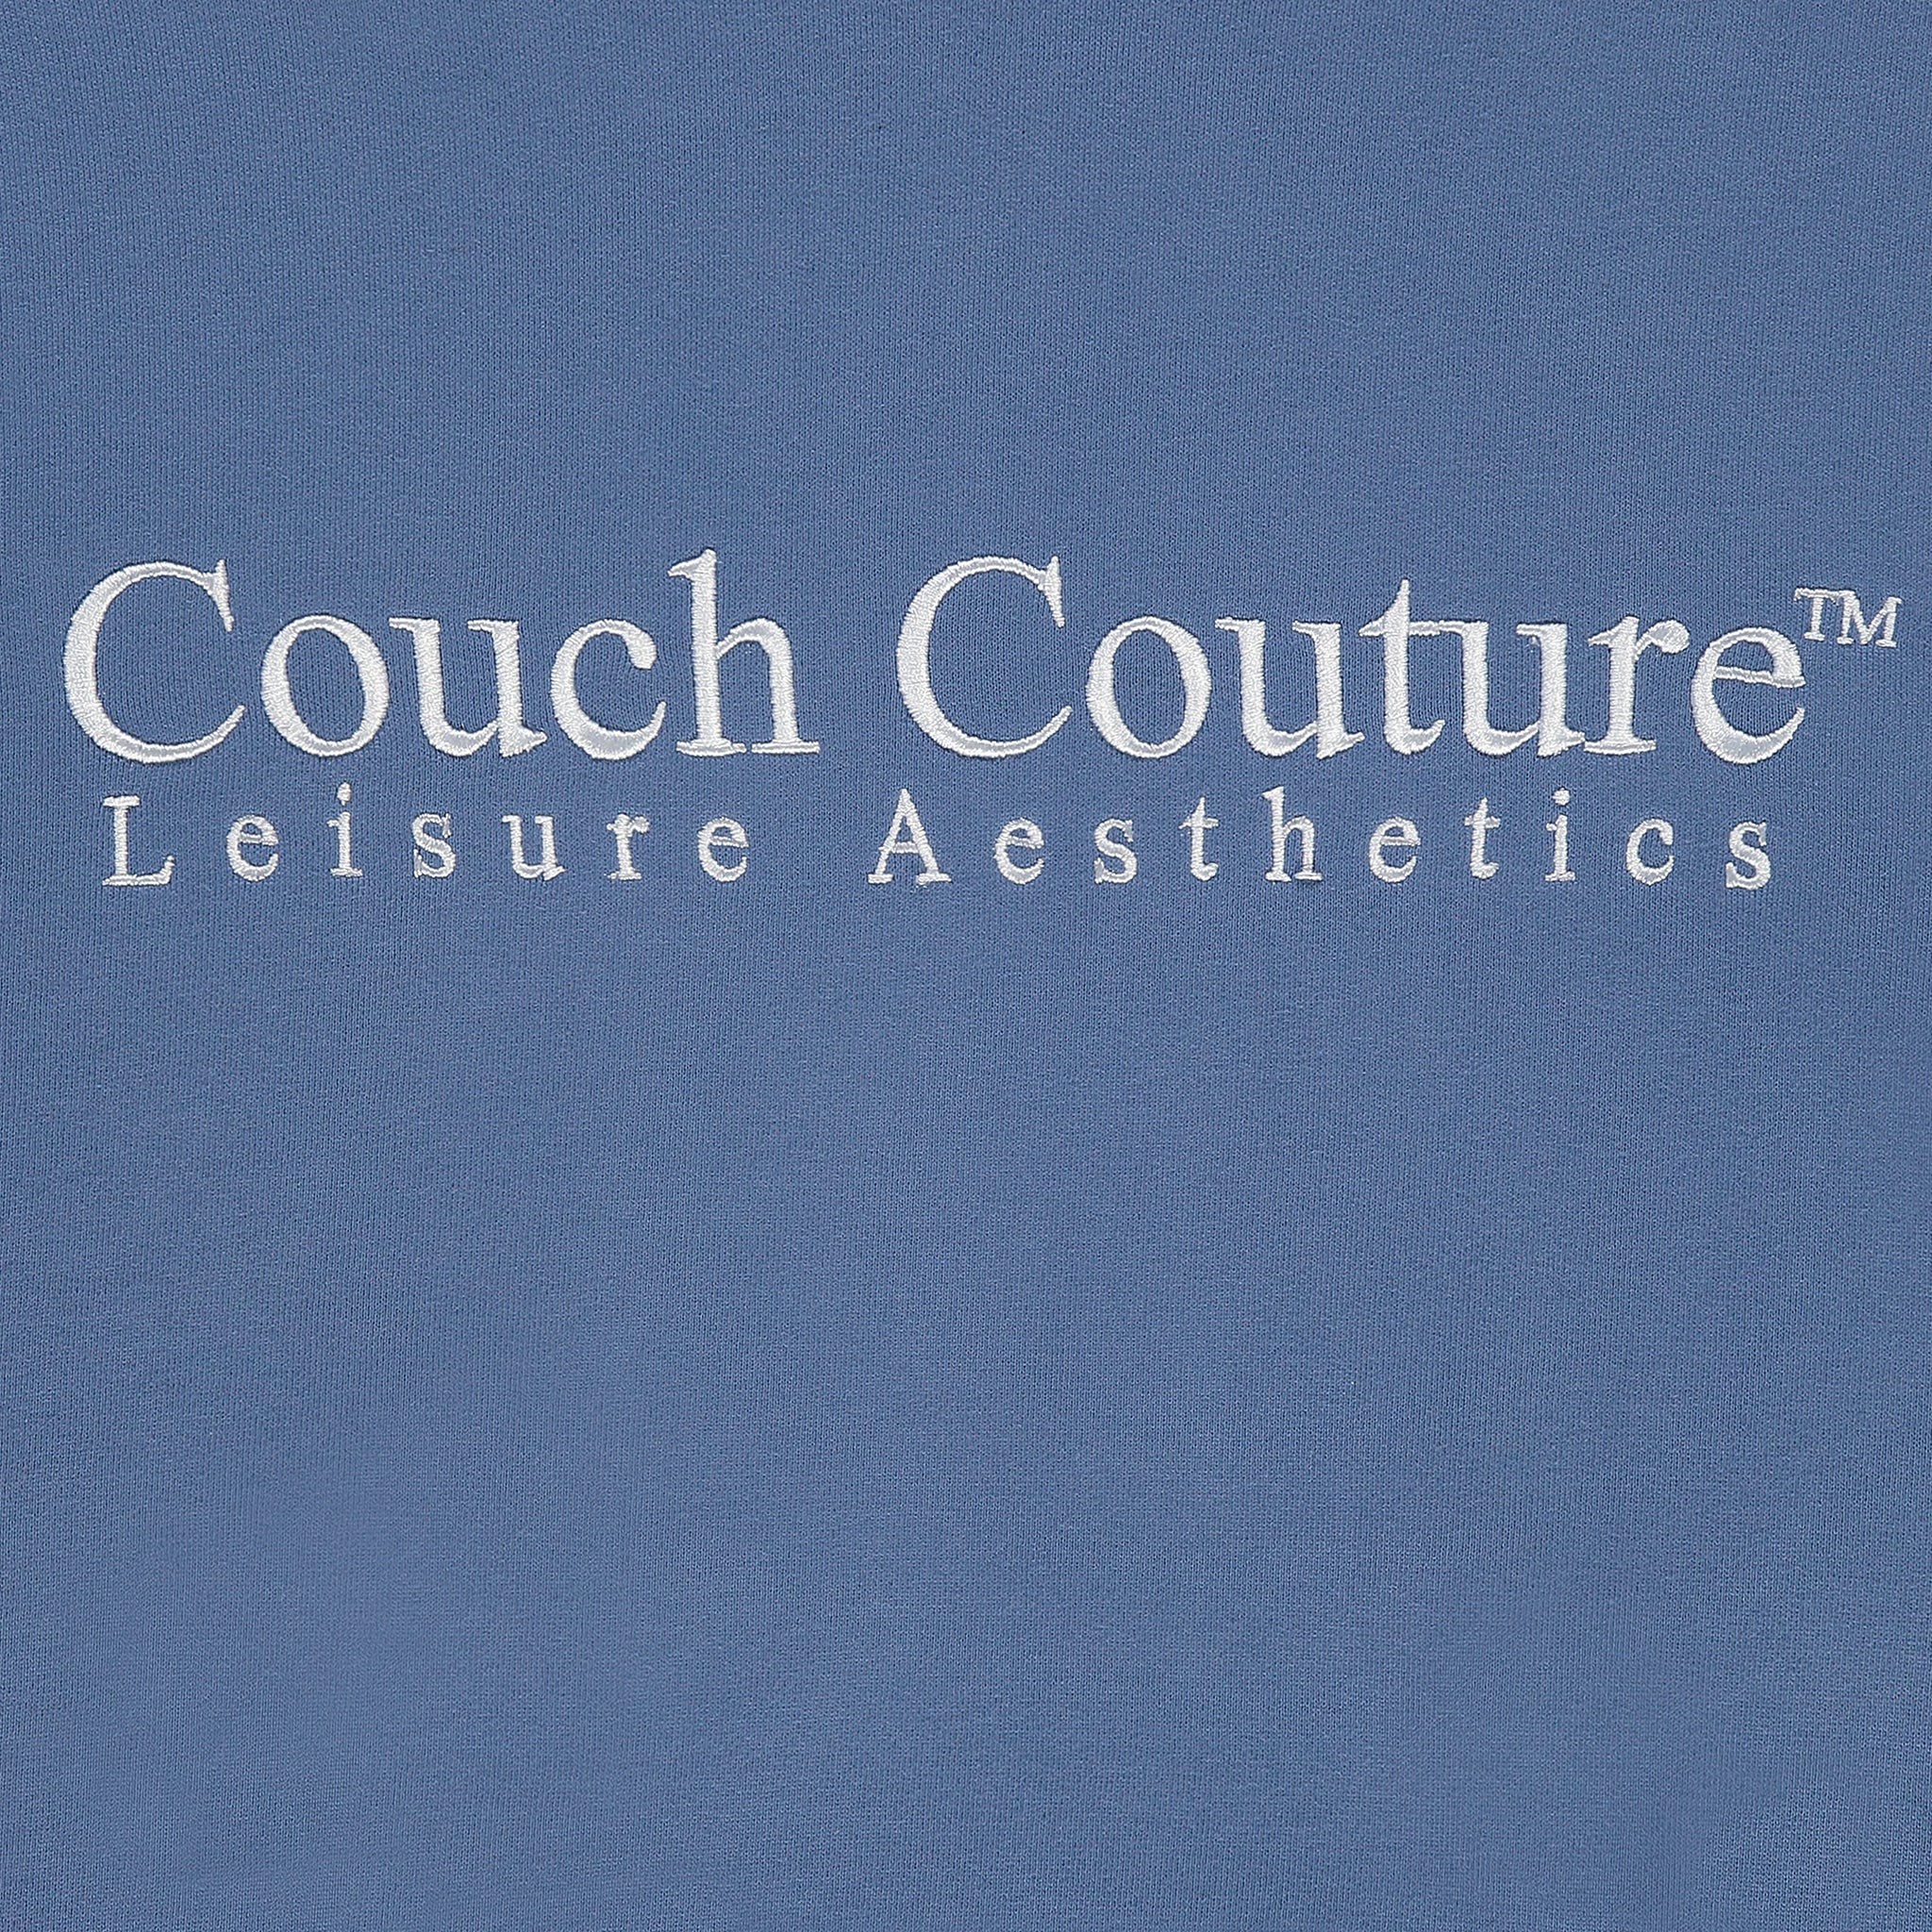 Couch Couture Hoodie Blue